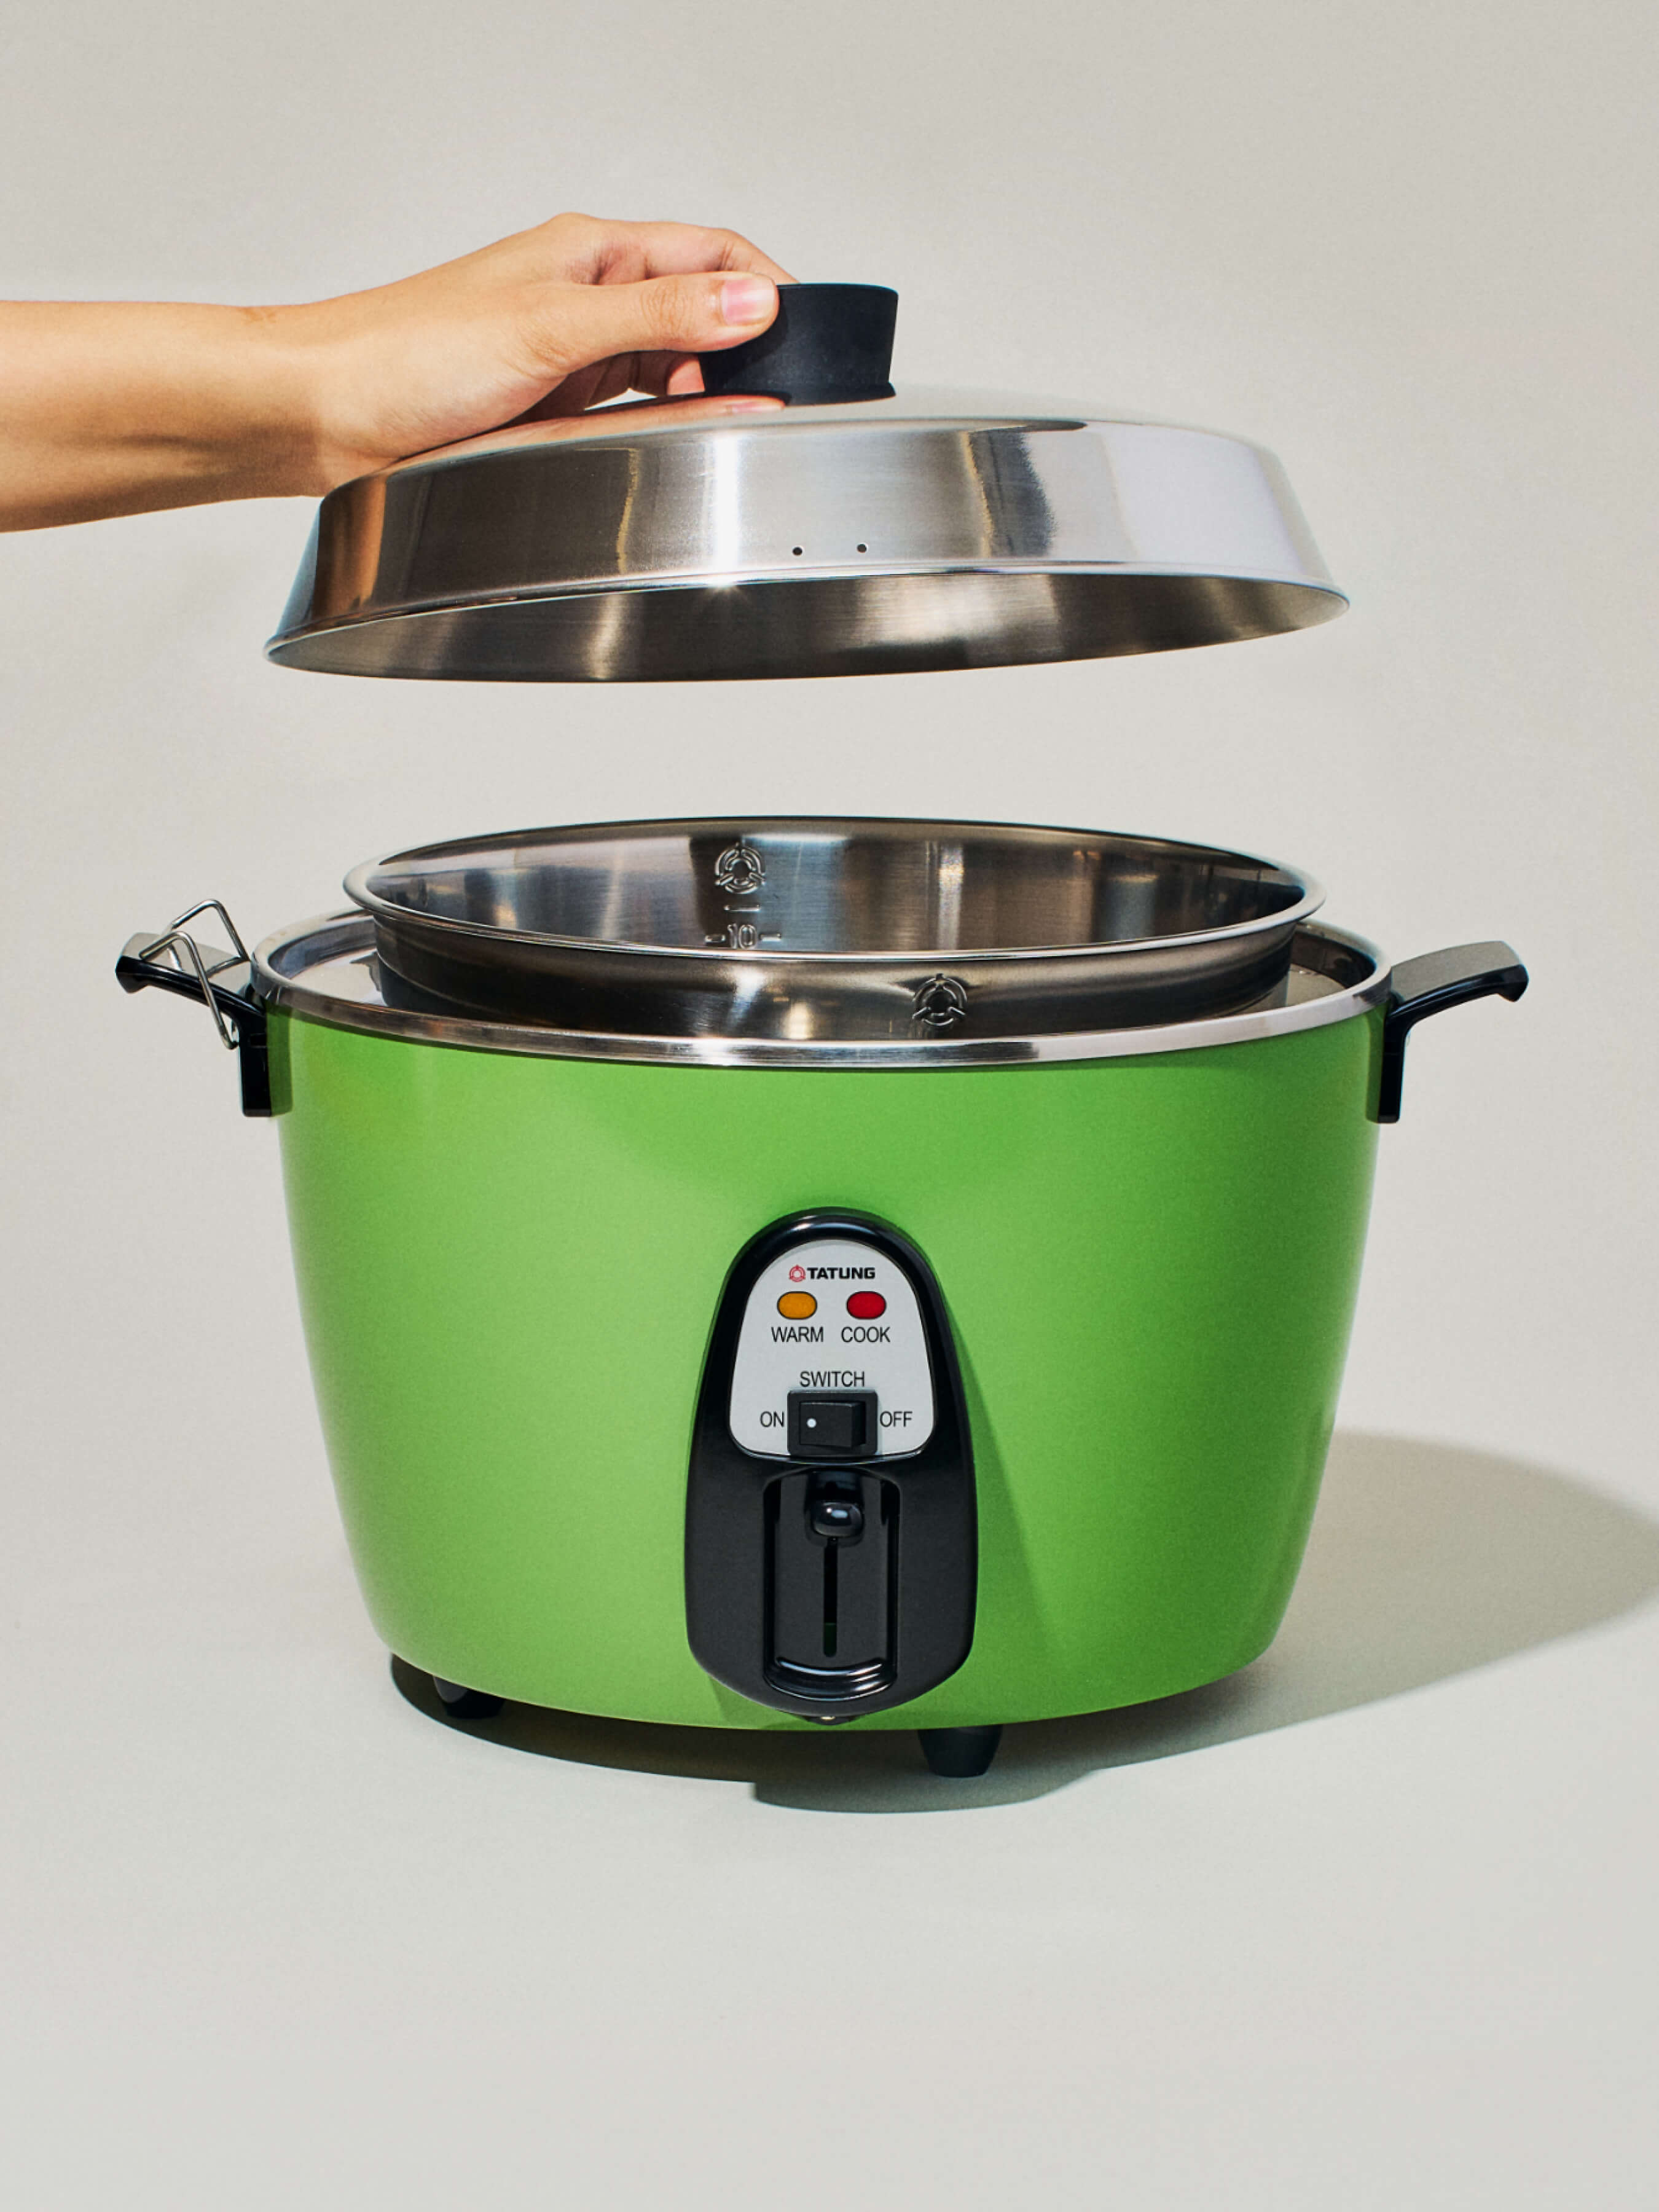 Tatung Electric Rice Cooker and Steamer (11-Cup Stainless Steel), Green